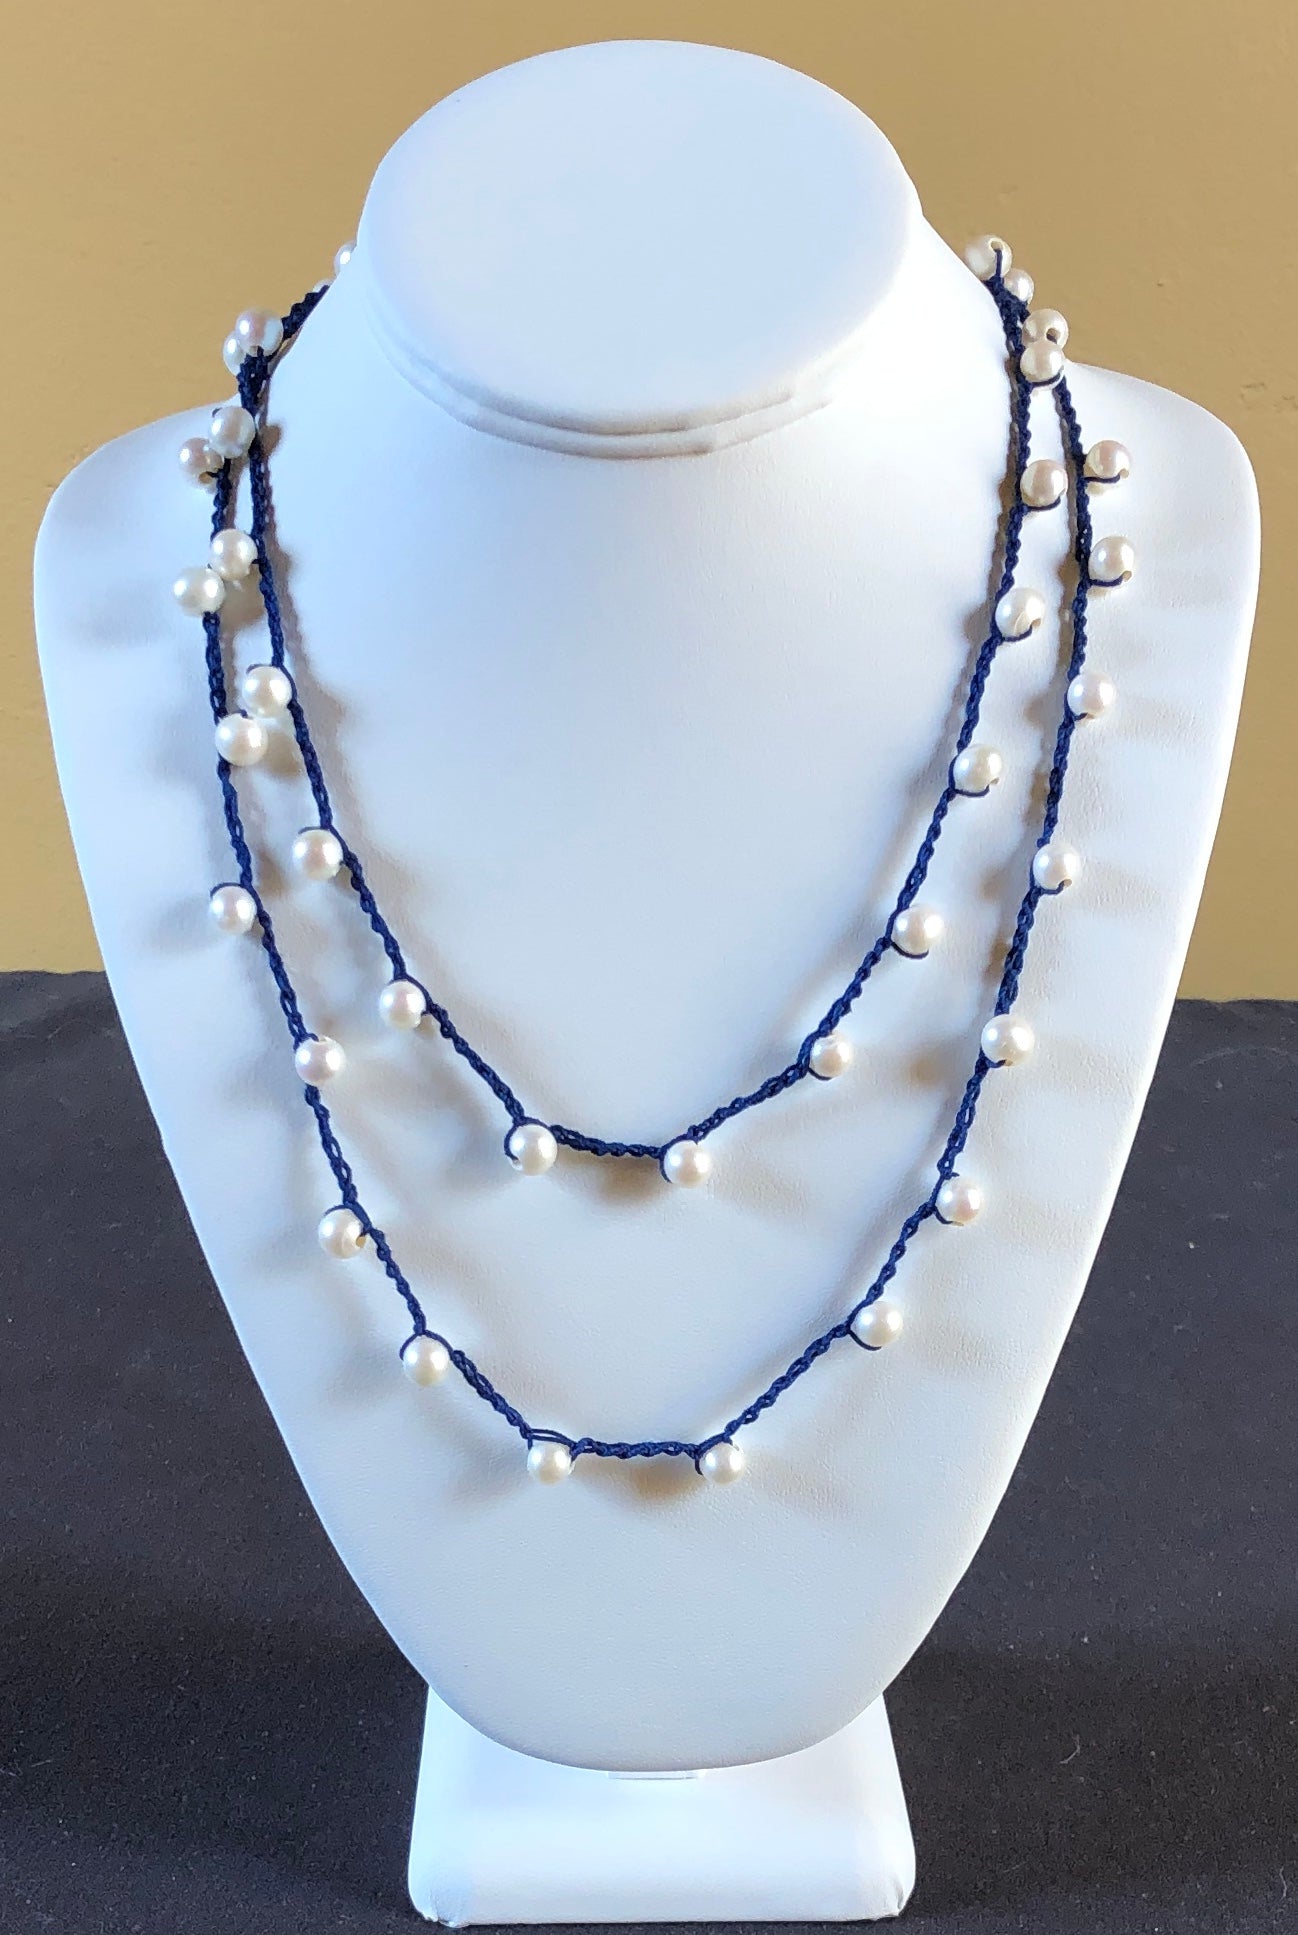 Necklace - Navy blue crocheted